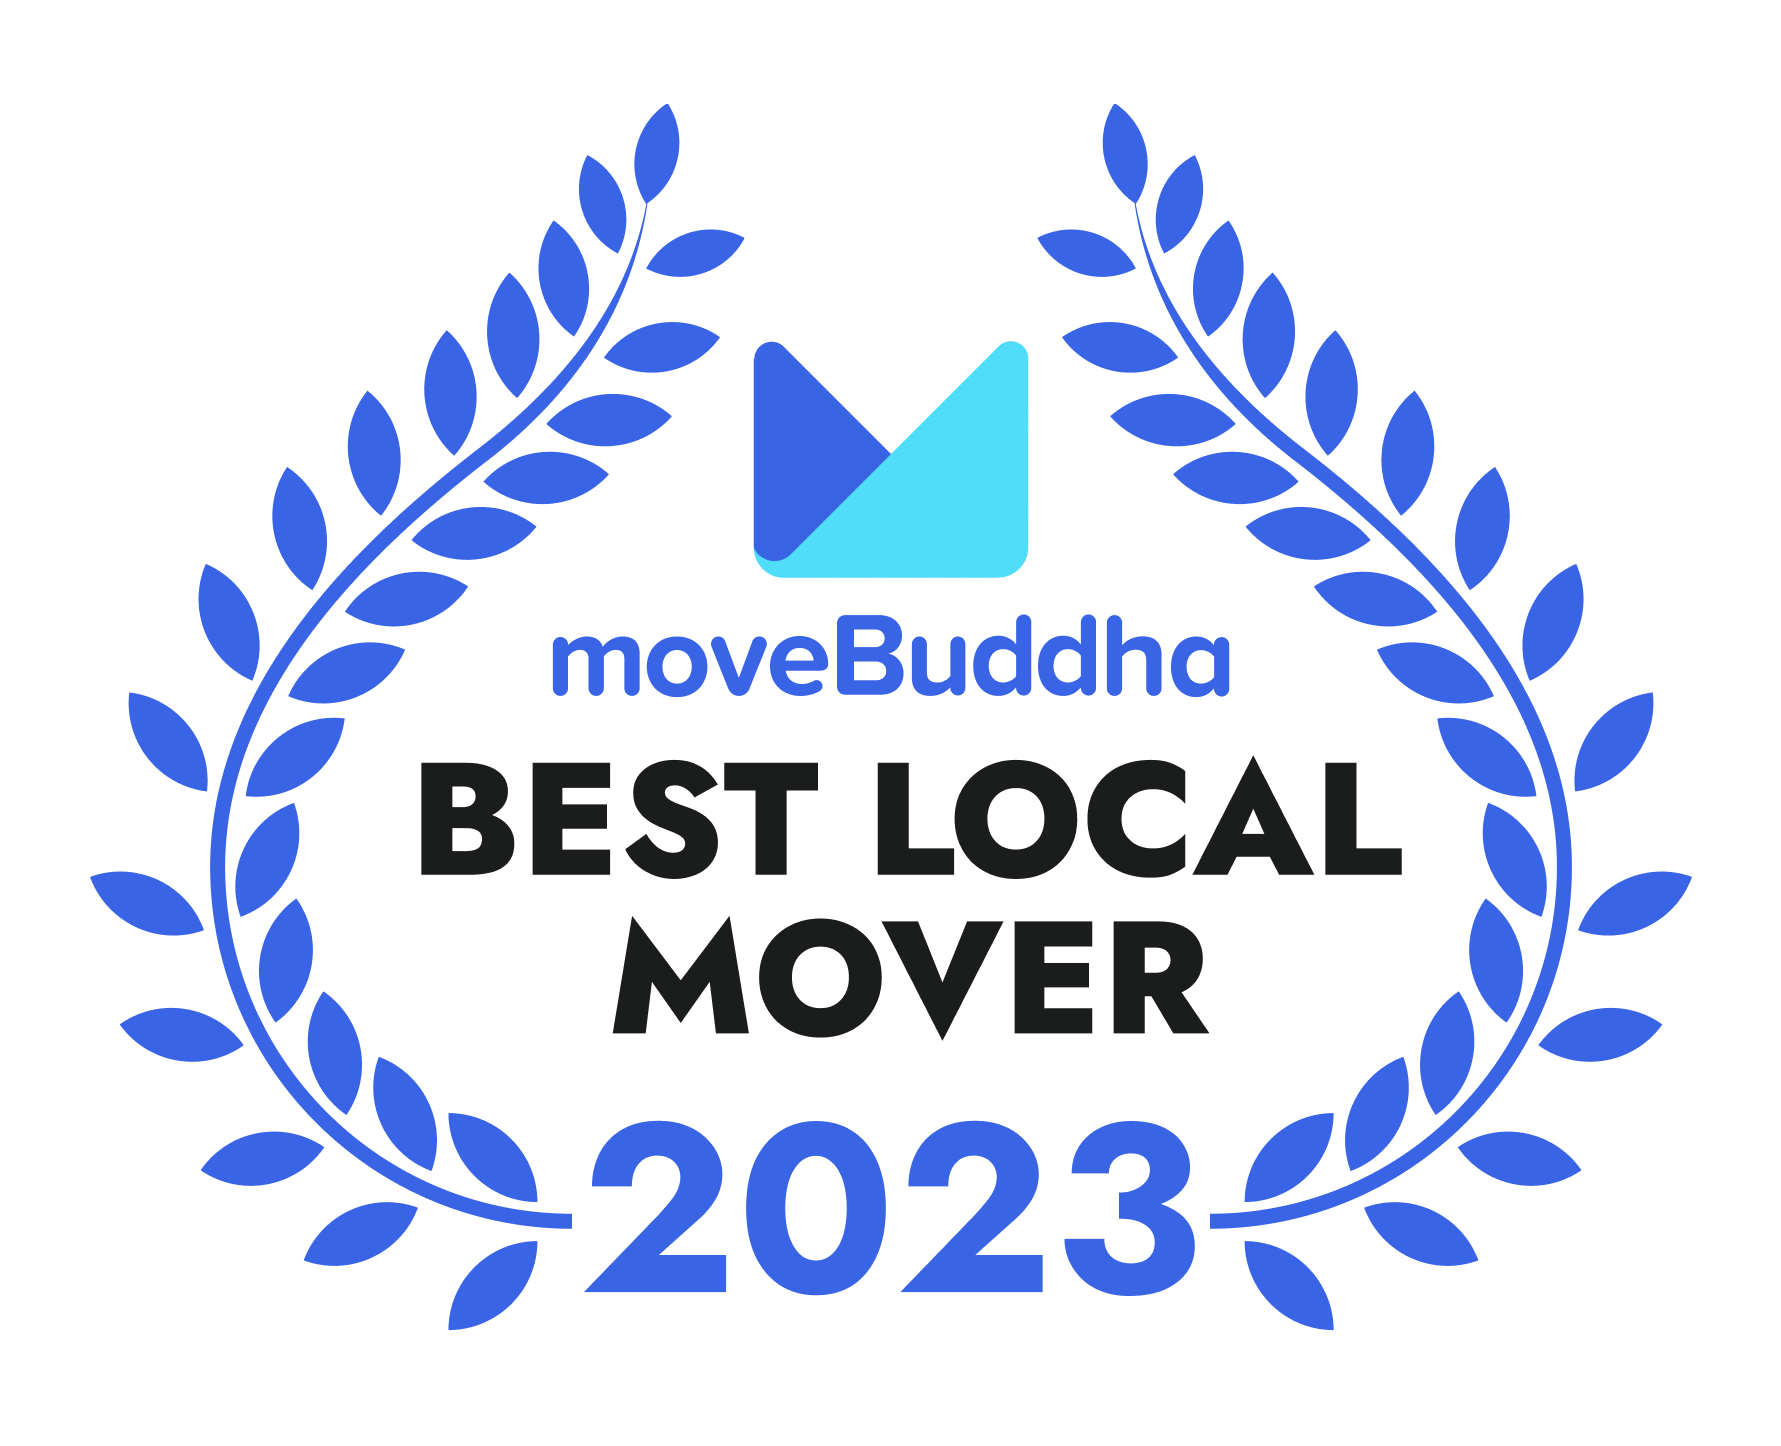 MoveBuddha Best Local Movers Chicago